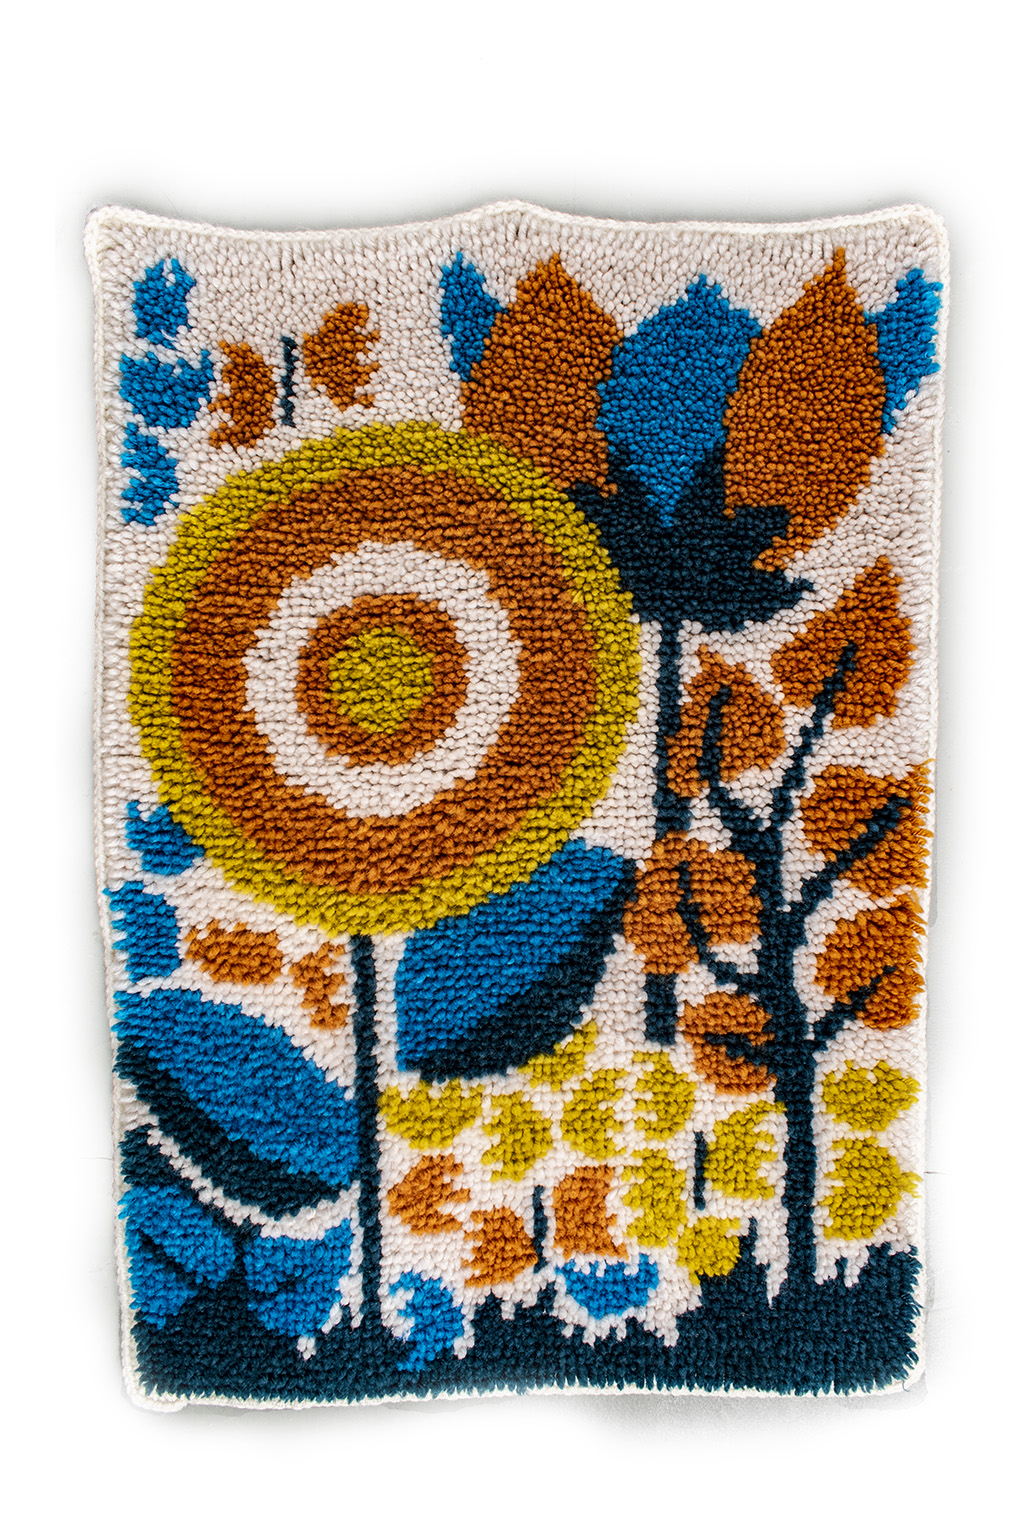 Small carpet with blue flower